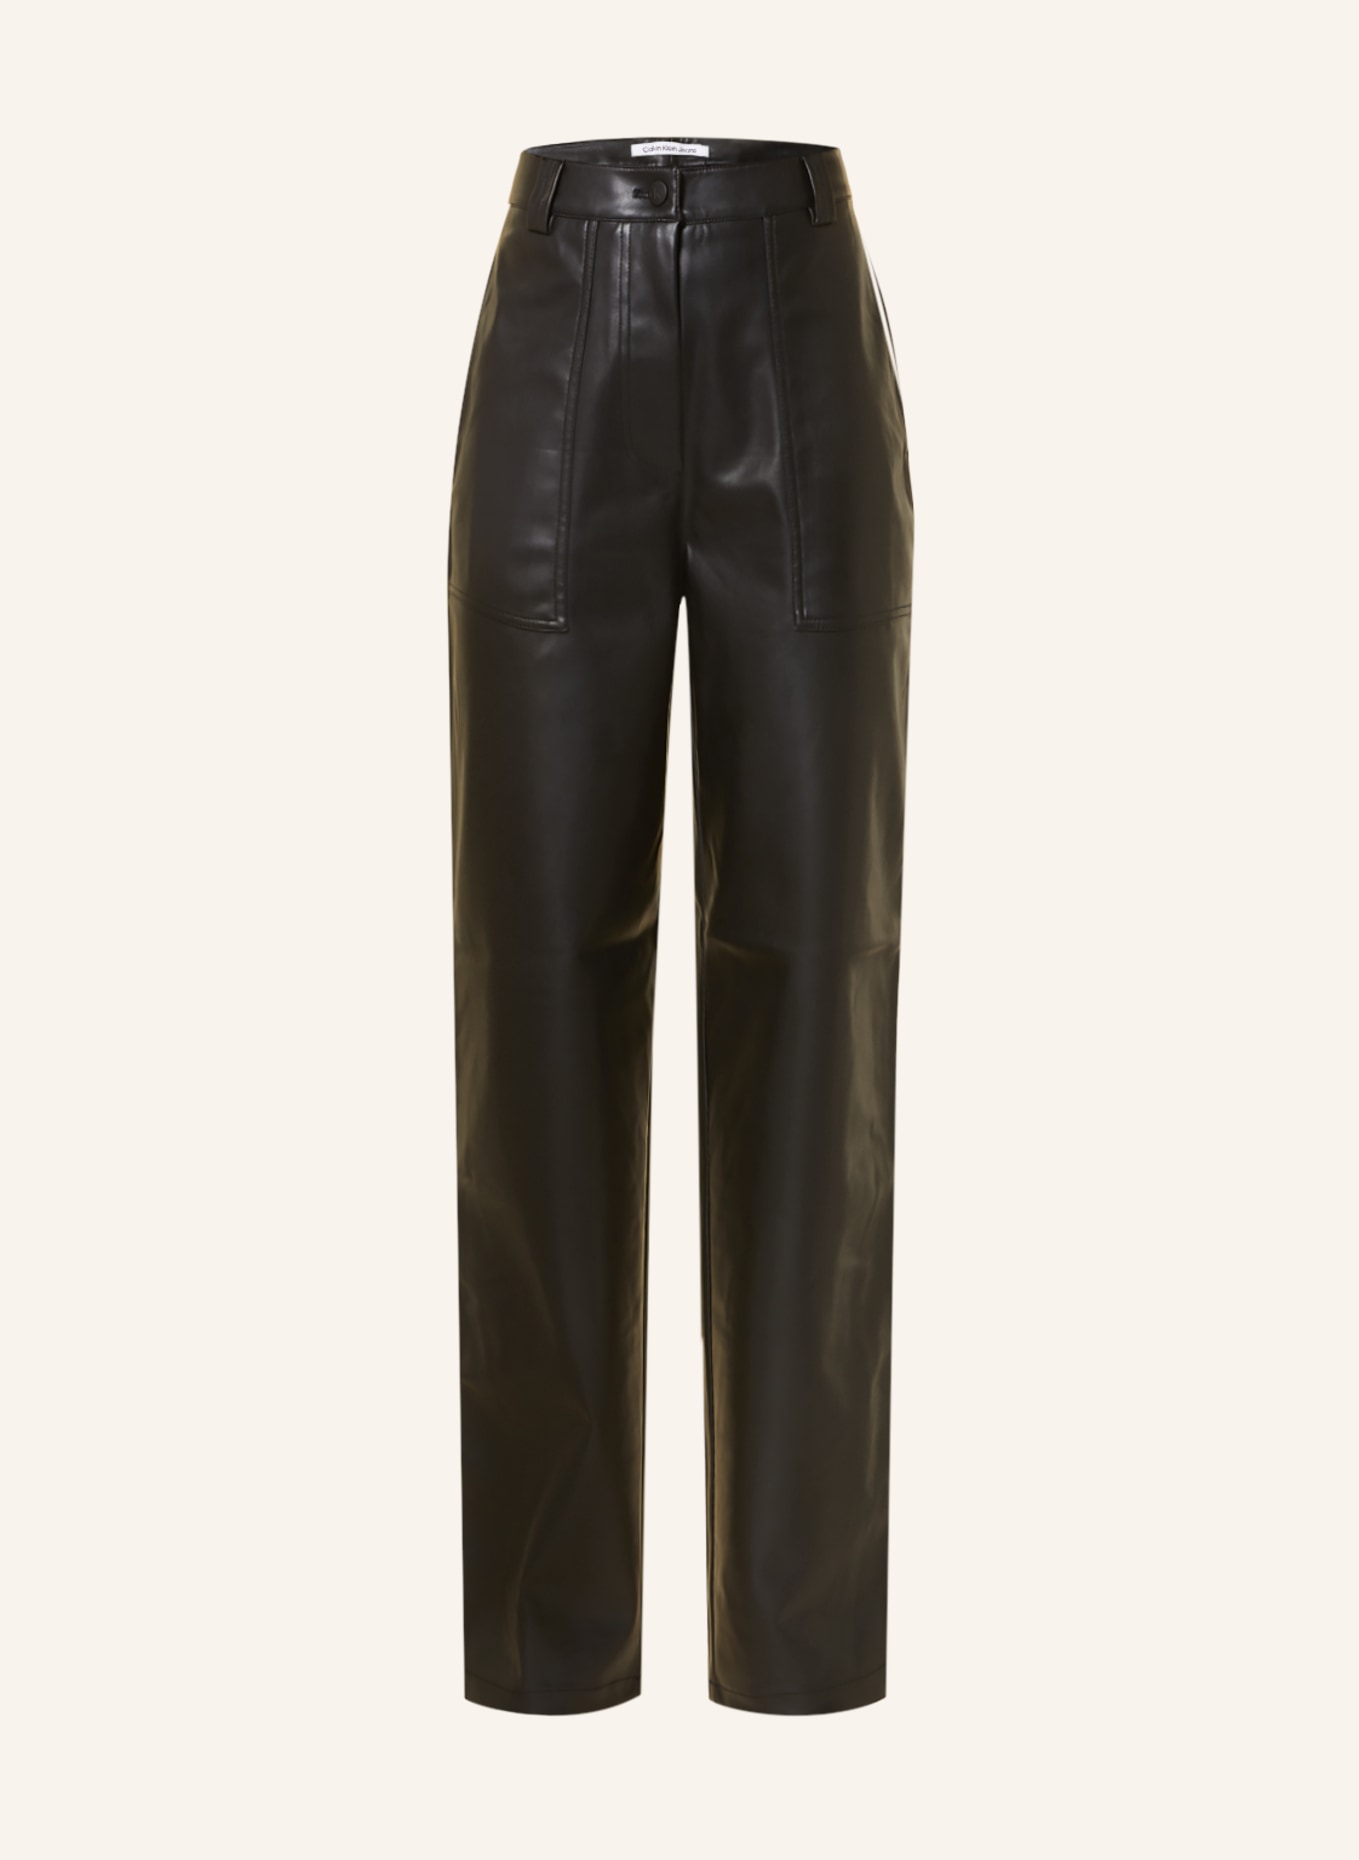 Calvin Klein Jeans Pants in leather look, Color: BEH CK Black (Image 1)